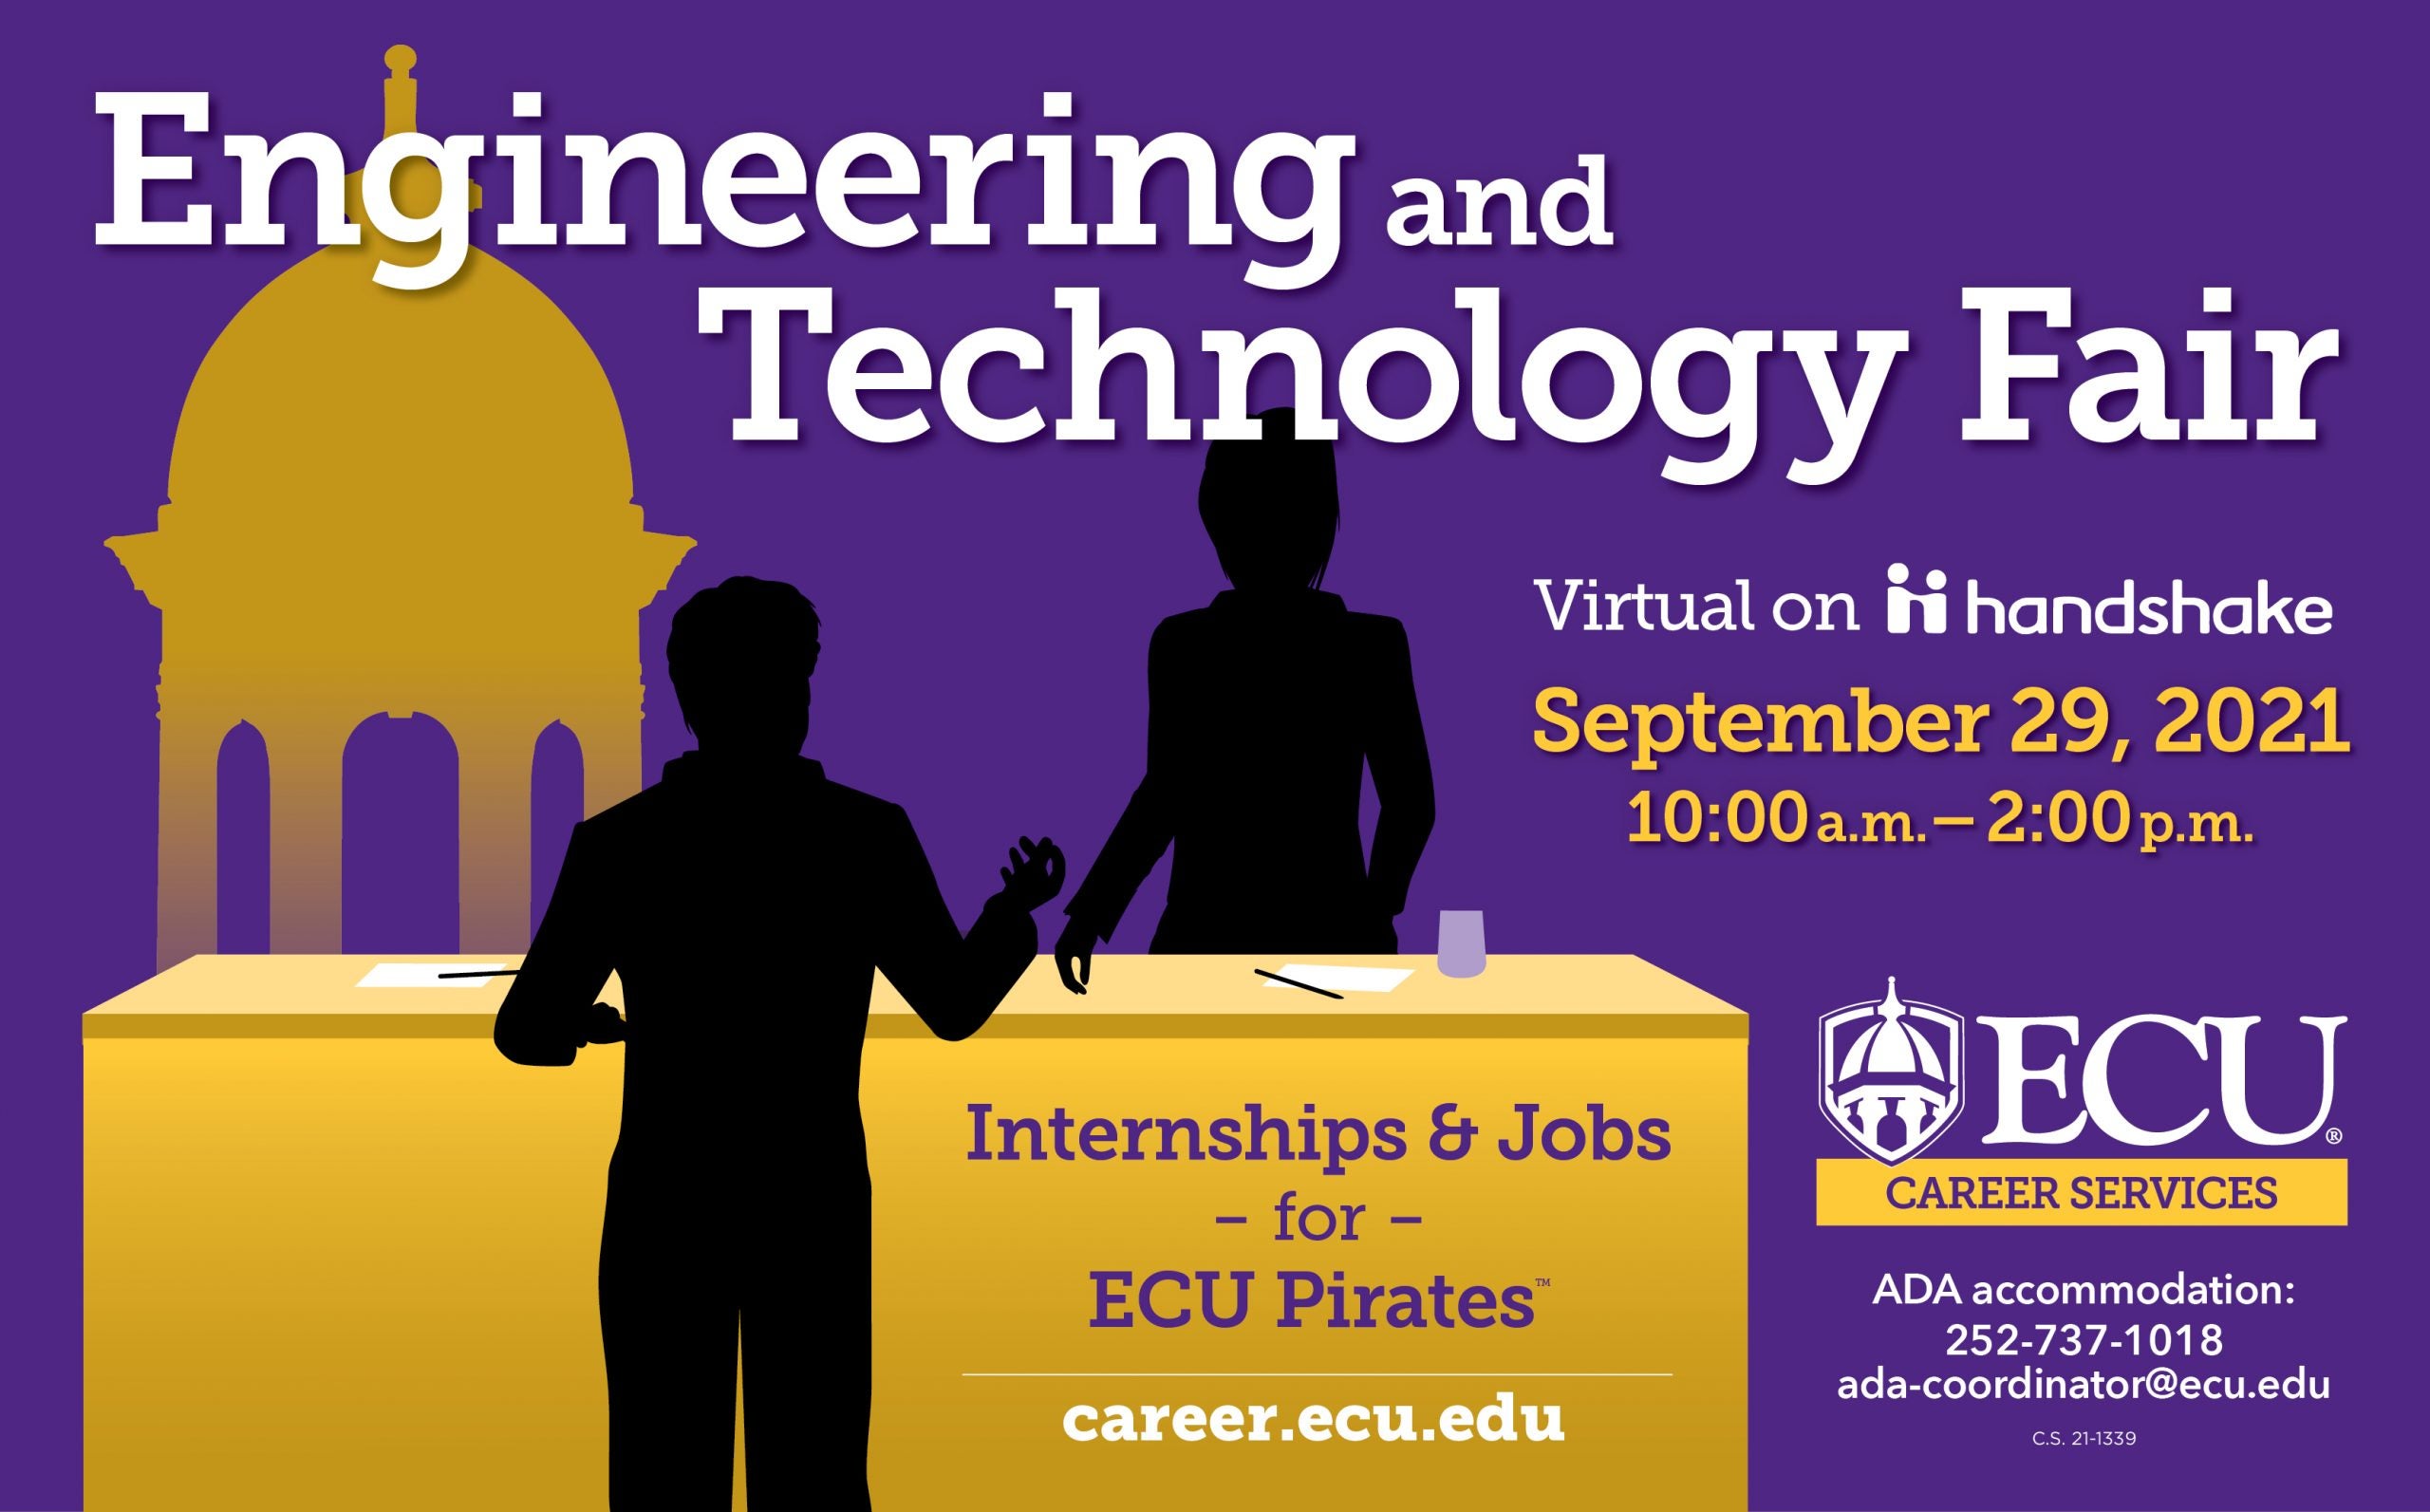 Engineering and technology fair virtual on handshake on September 29, 2021 from 10 am - 2 pm, internships and jobs for ECU pirates career.ecu.edu